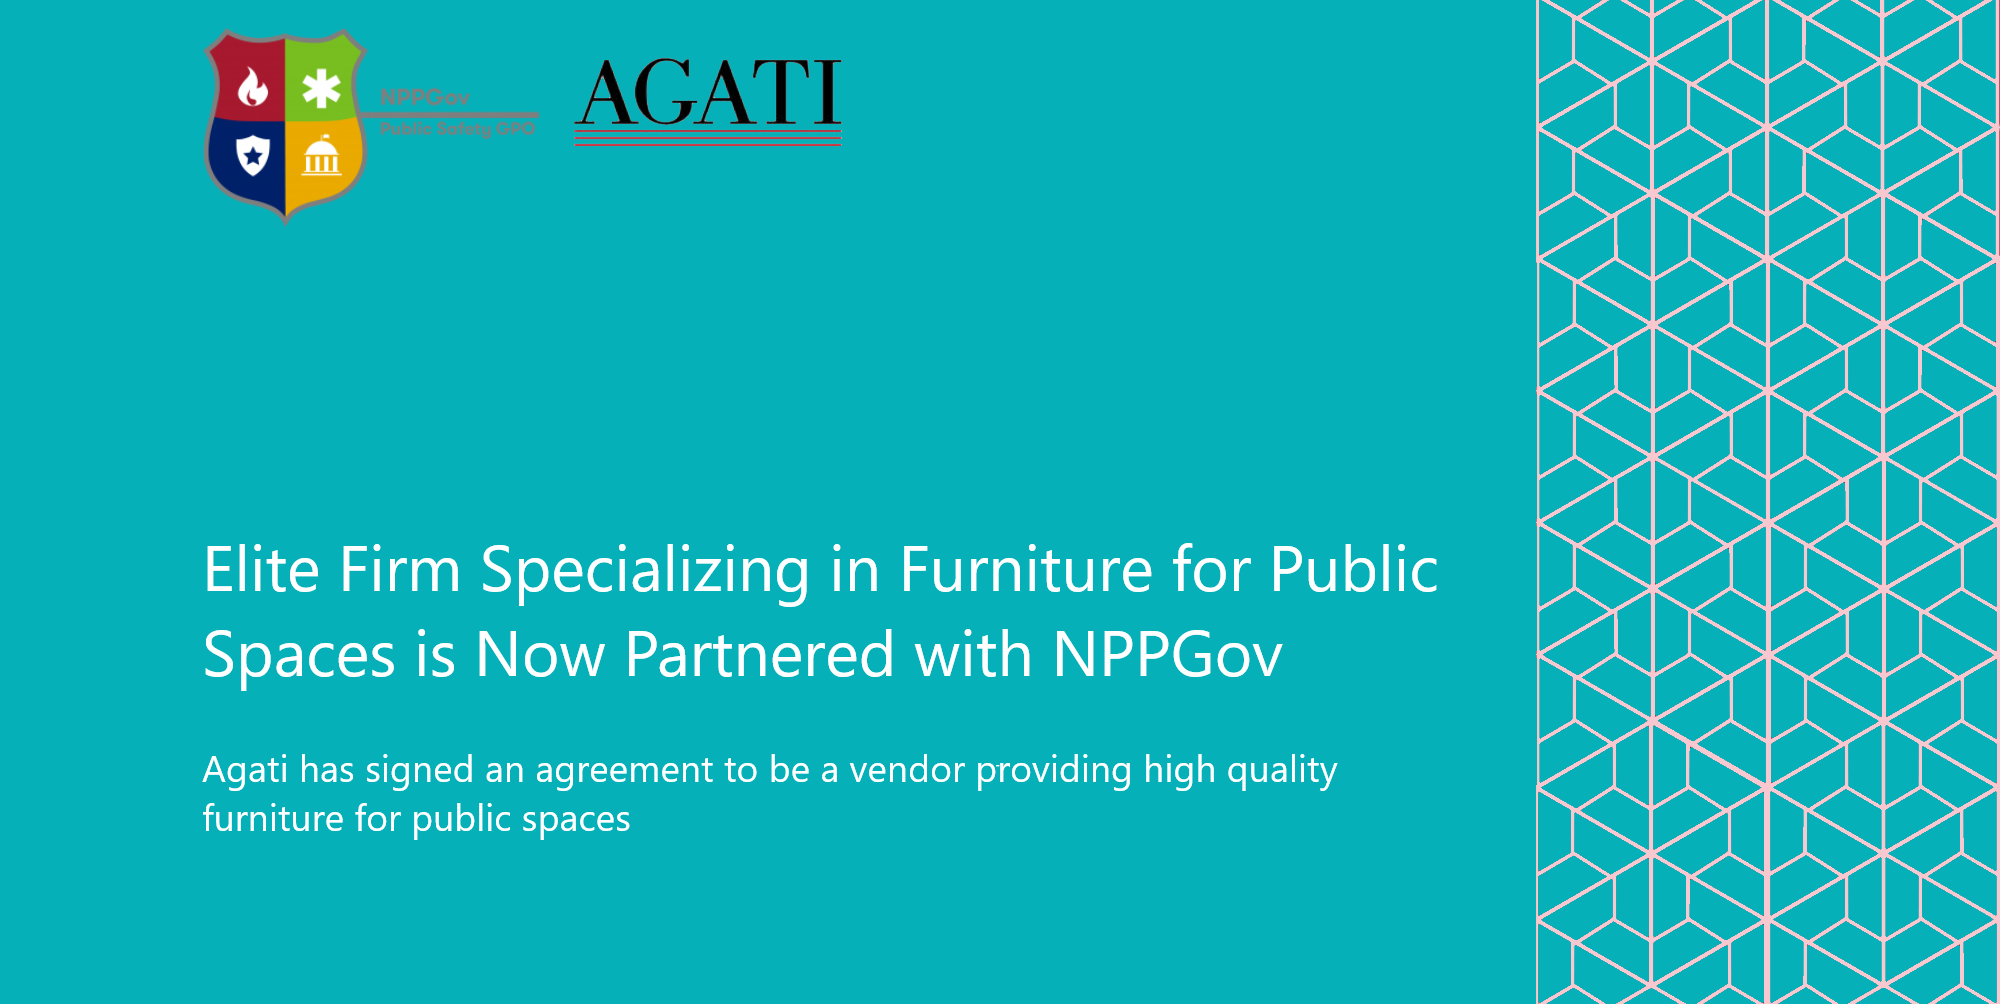 Elite Firm Specializing in Furniture for Public Spaces is Now Partnered with NPPGov